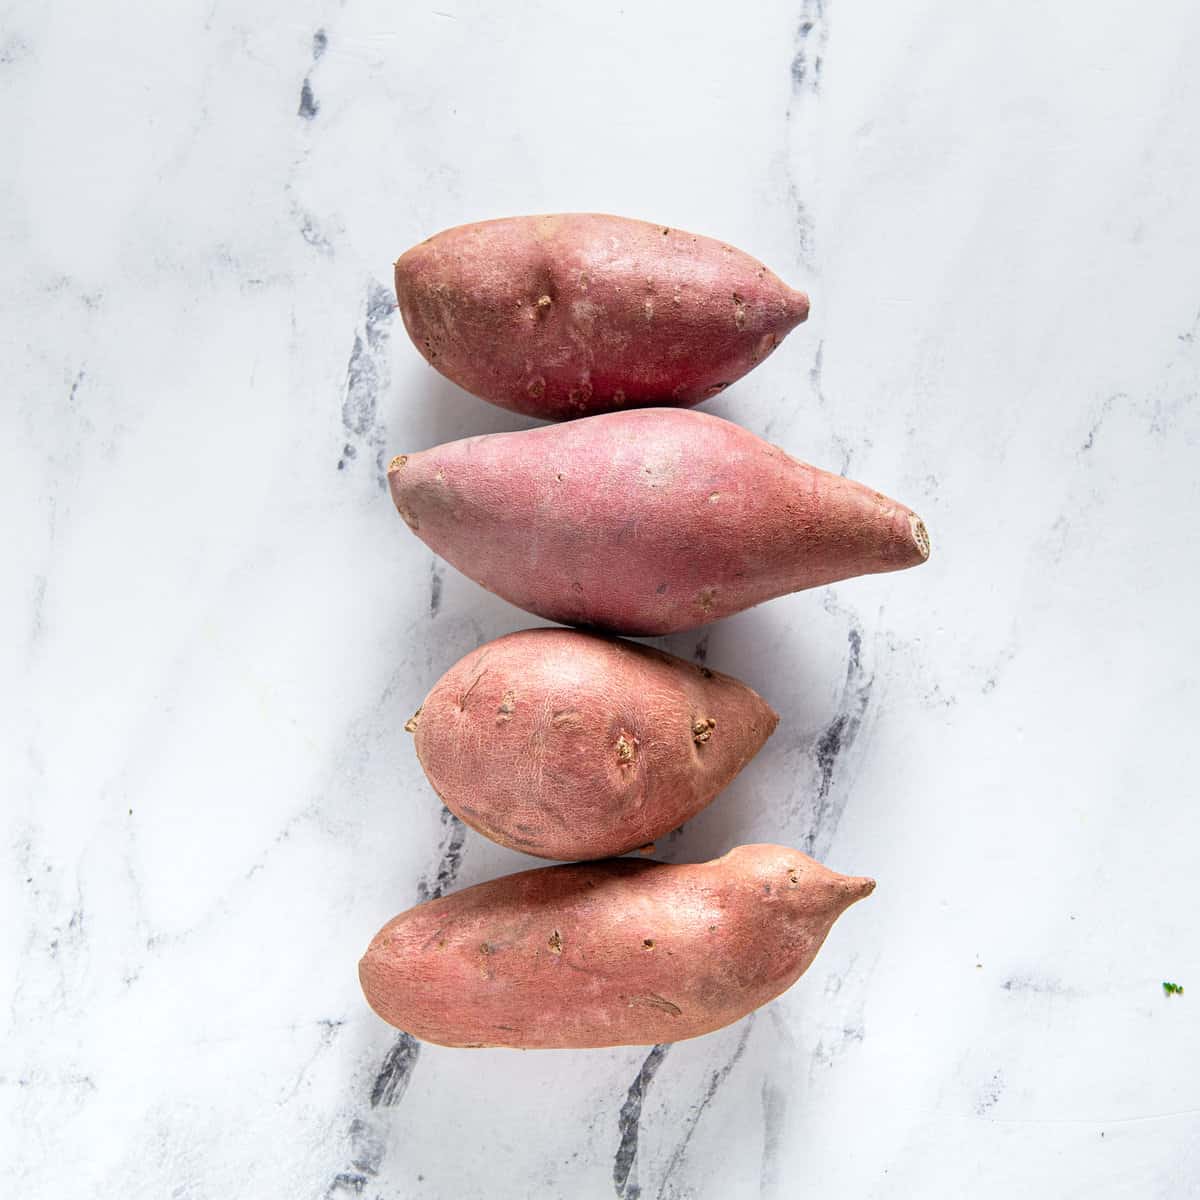 Four sweet potatoes on a kitchen counter.